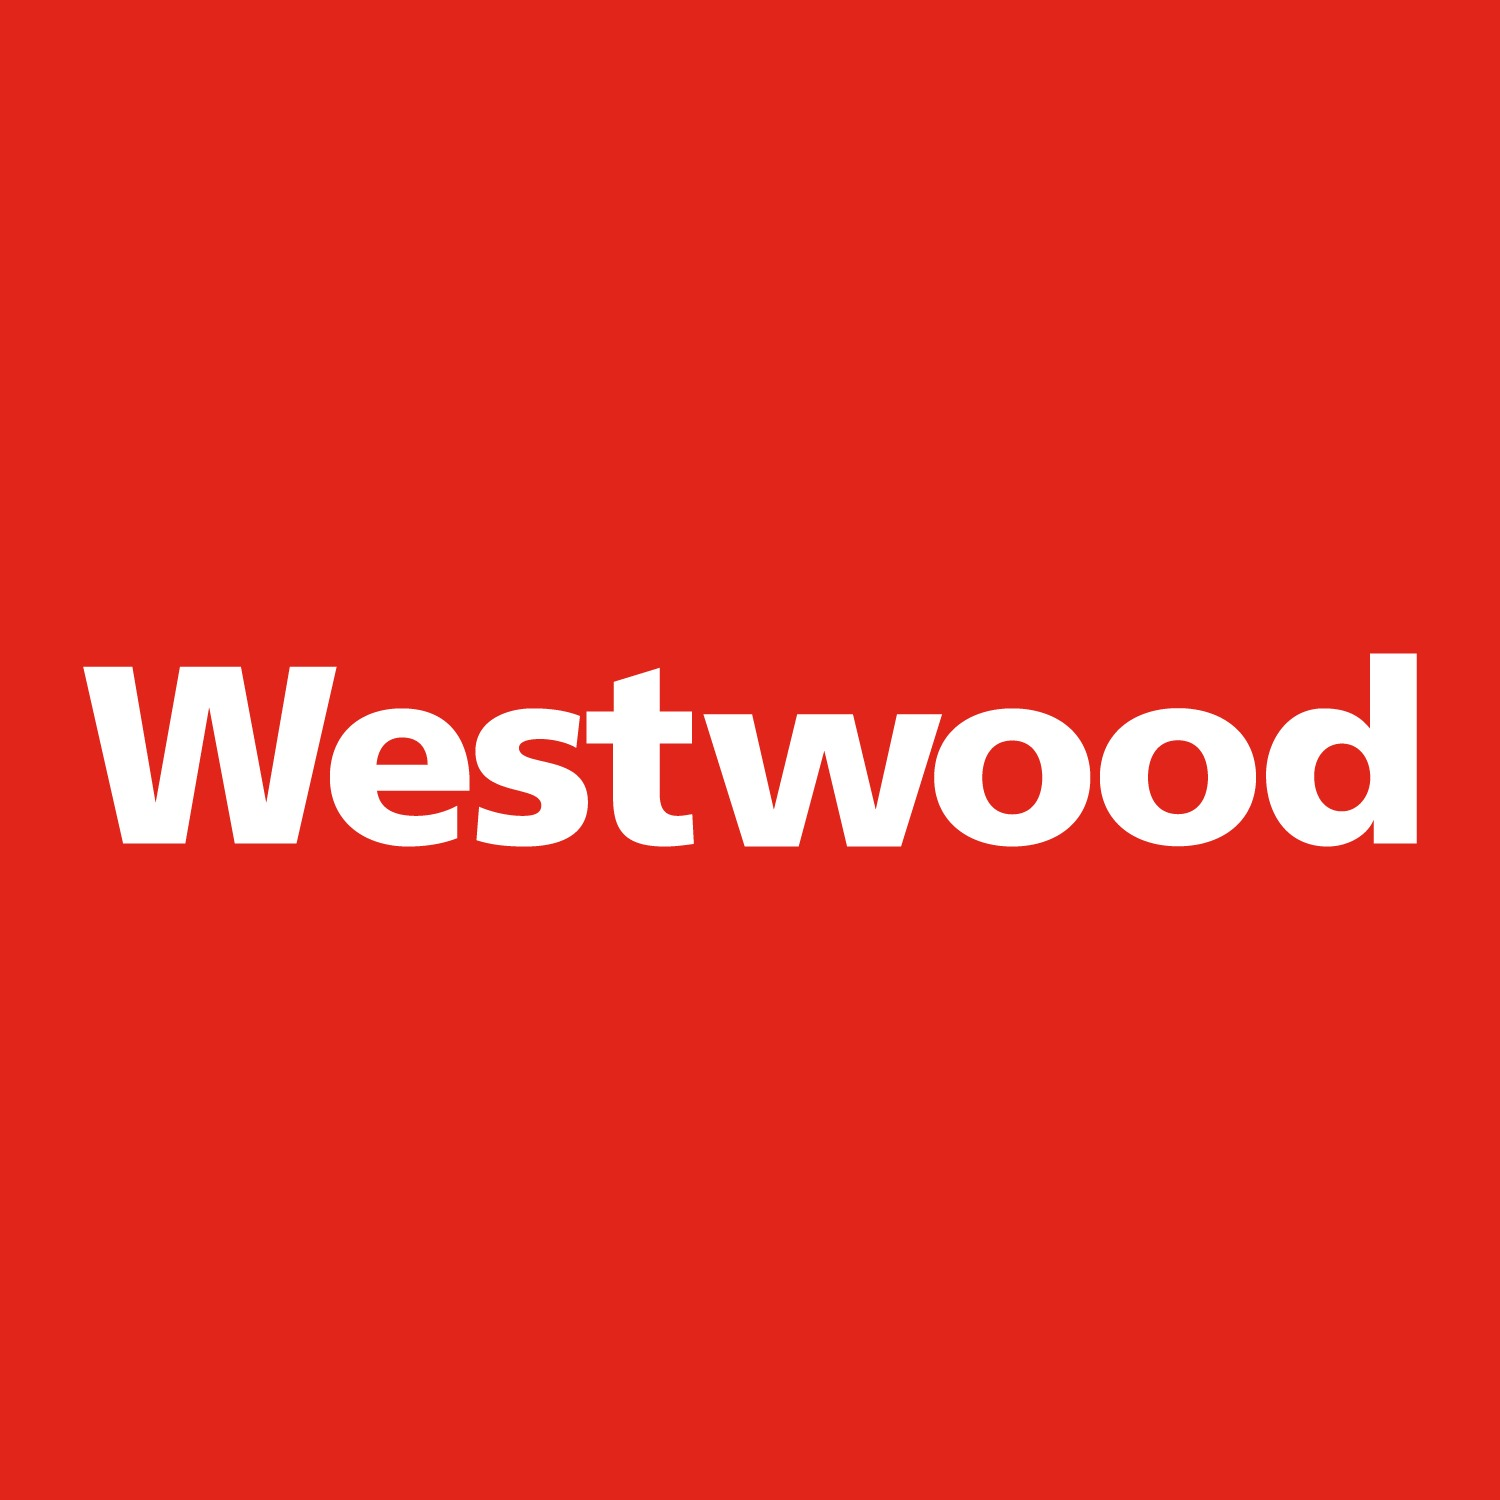 Westwood Professional Services - Fort Worth, TX 76109 - (817)412-7155 | ShowMeLocal.com